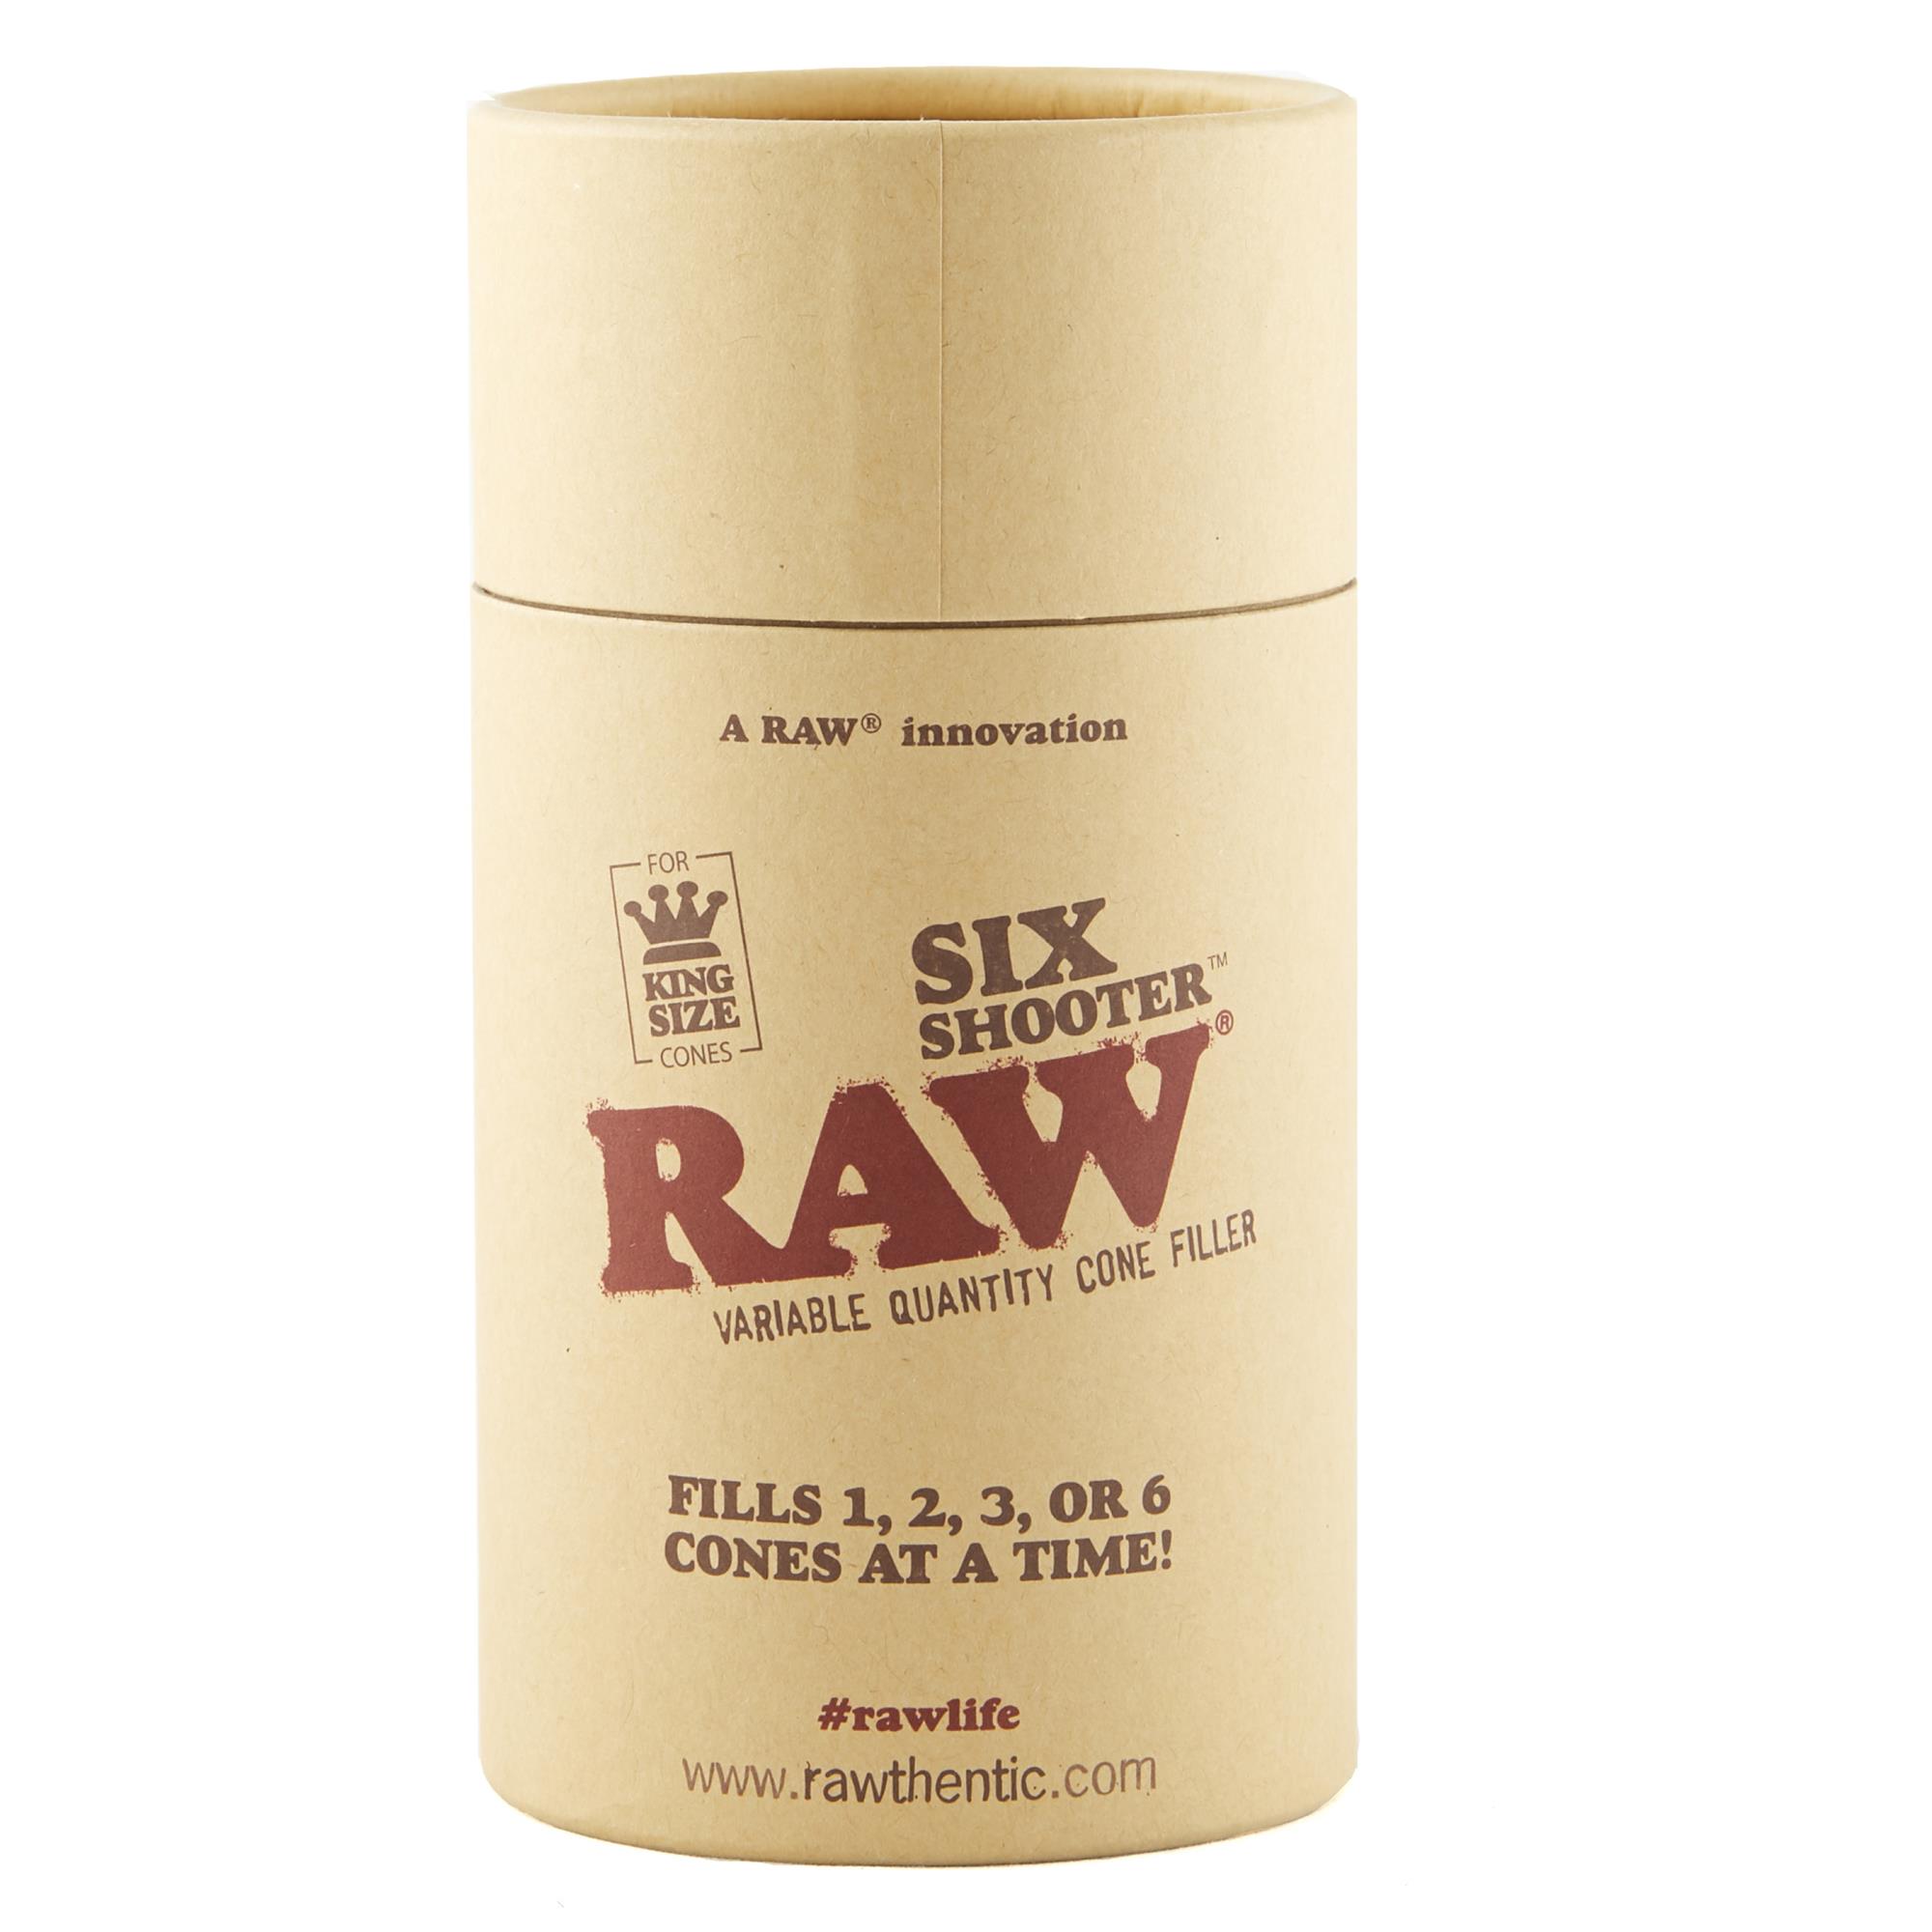 RAW SIX SHOOTER KING SIZE CONE FILLER